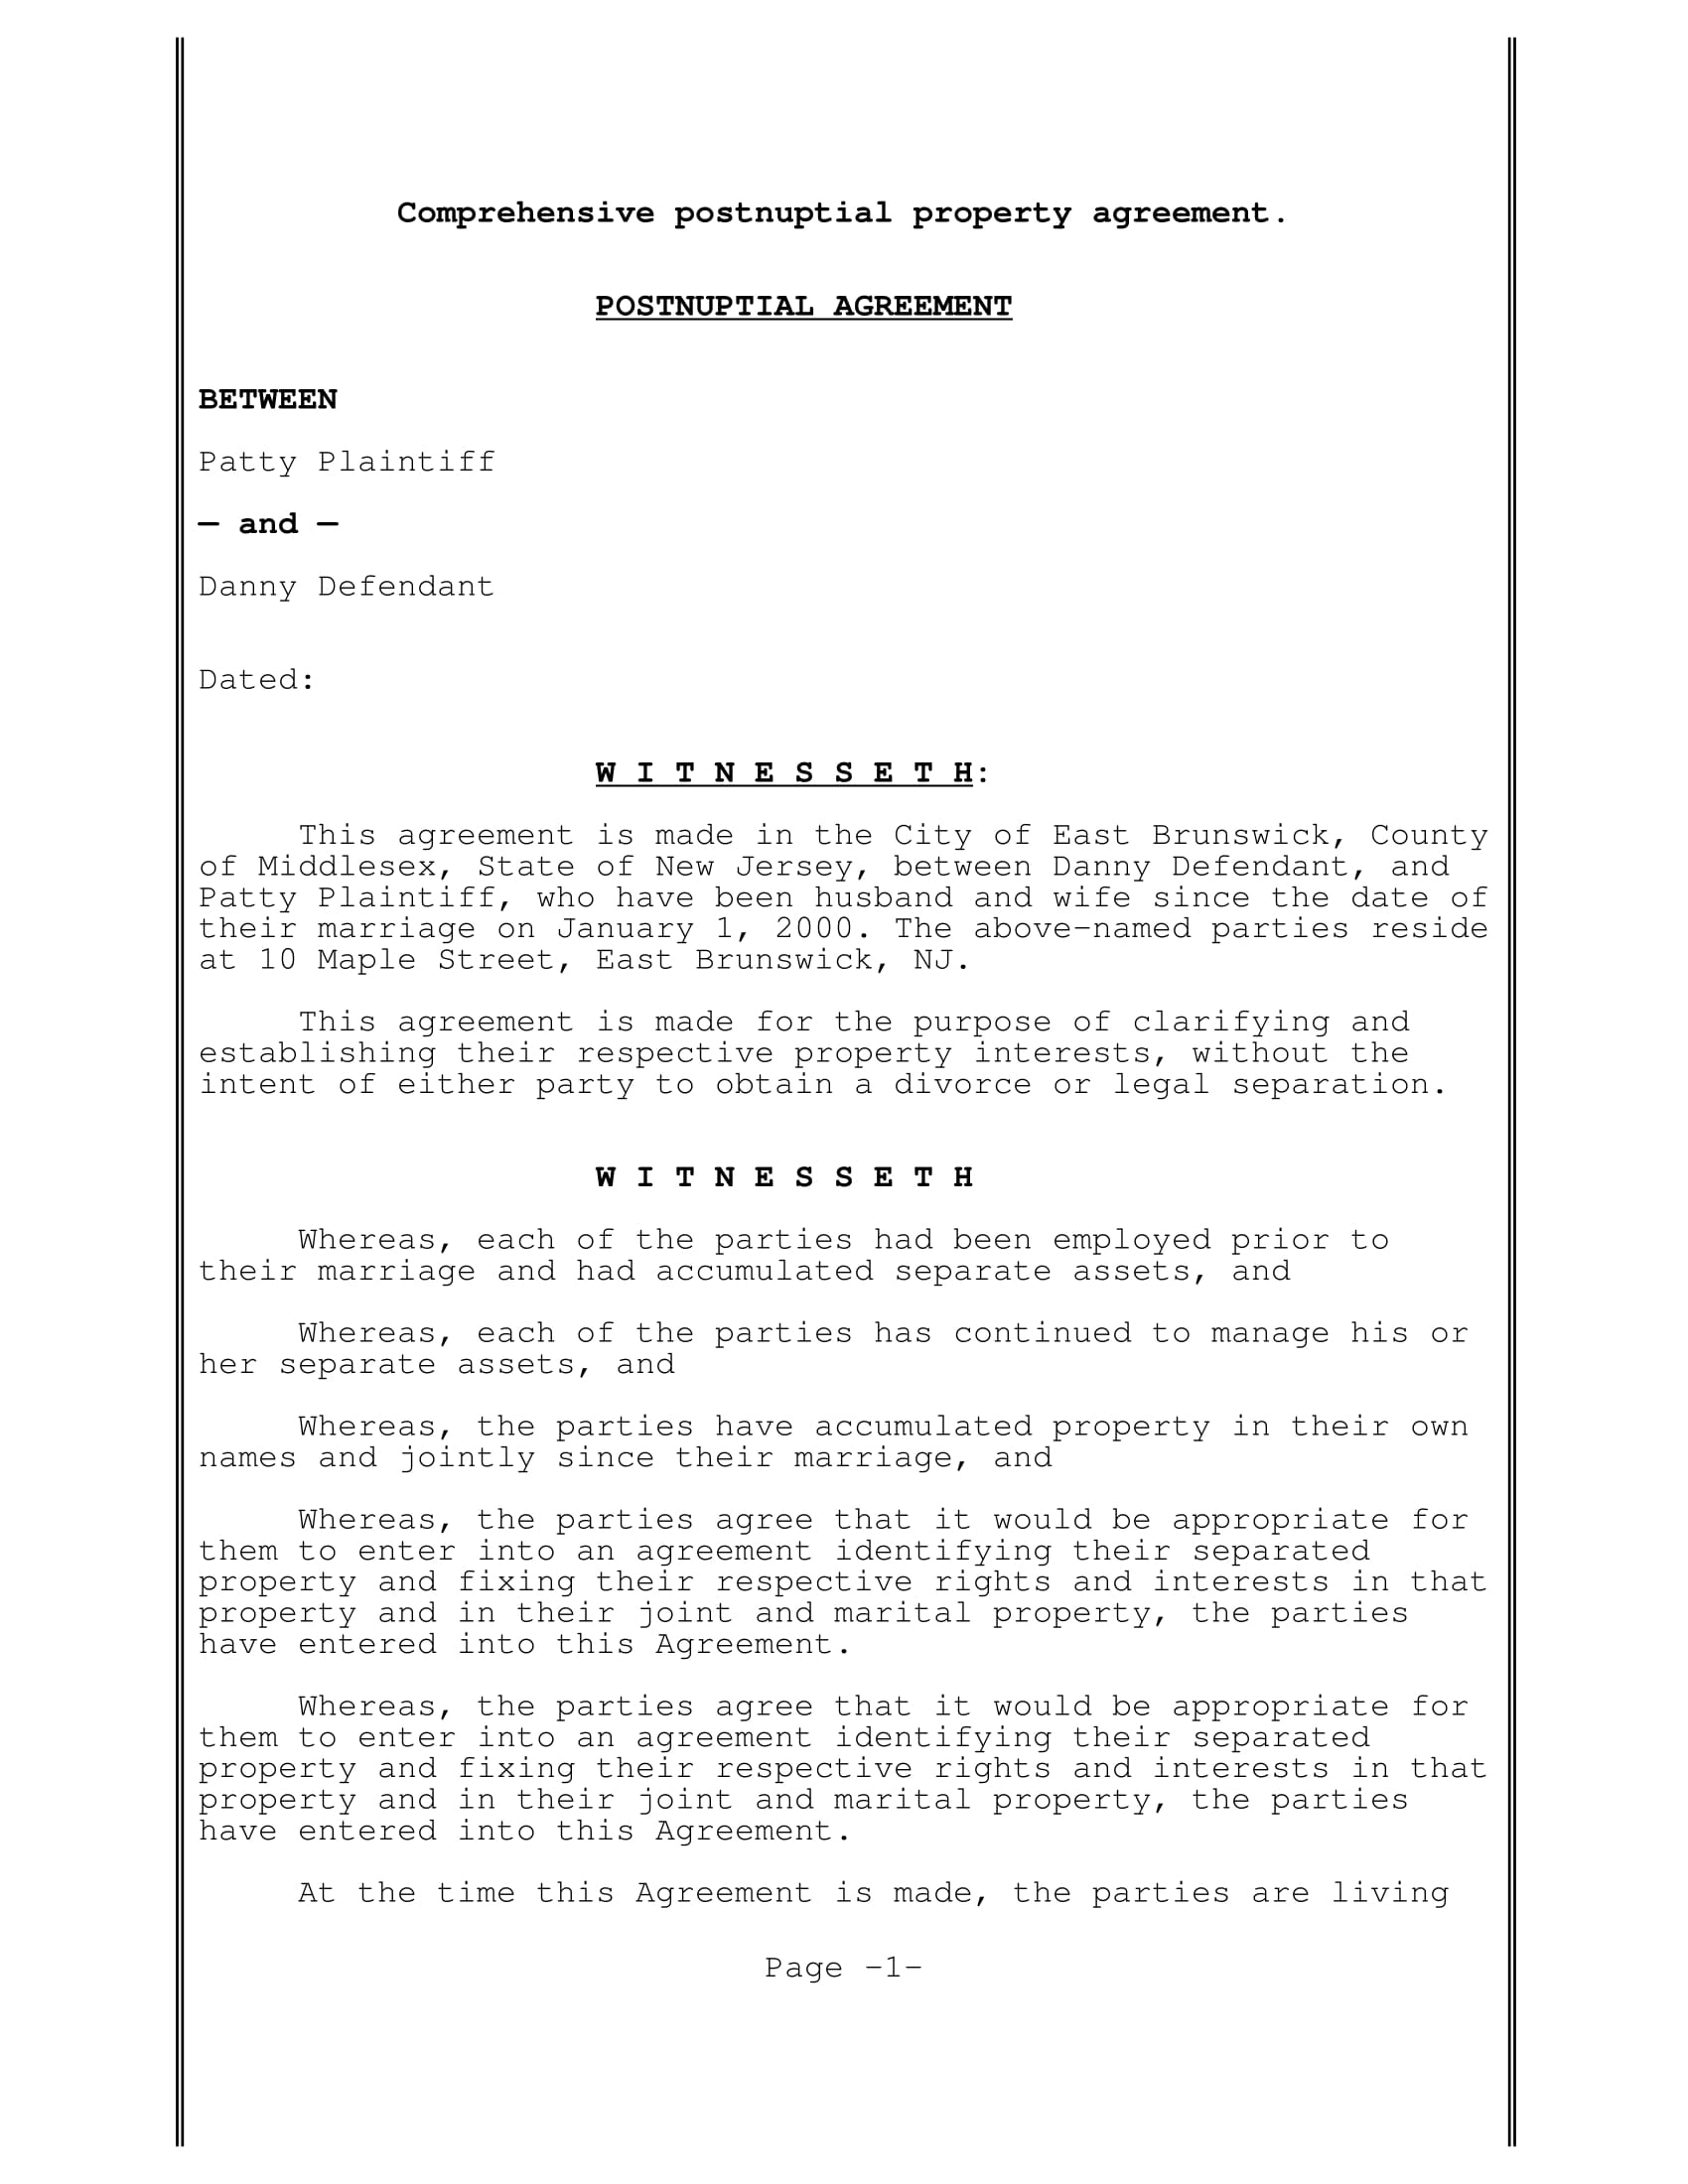 postnuptial property agreement contract form 01